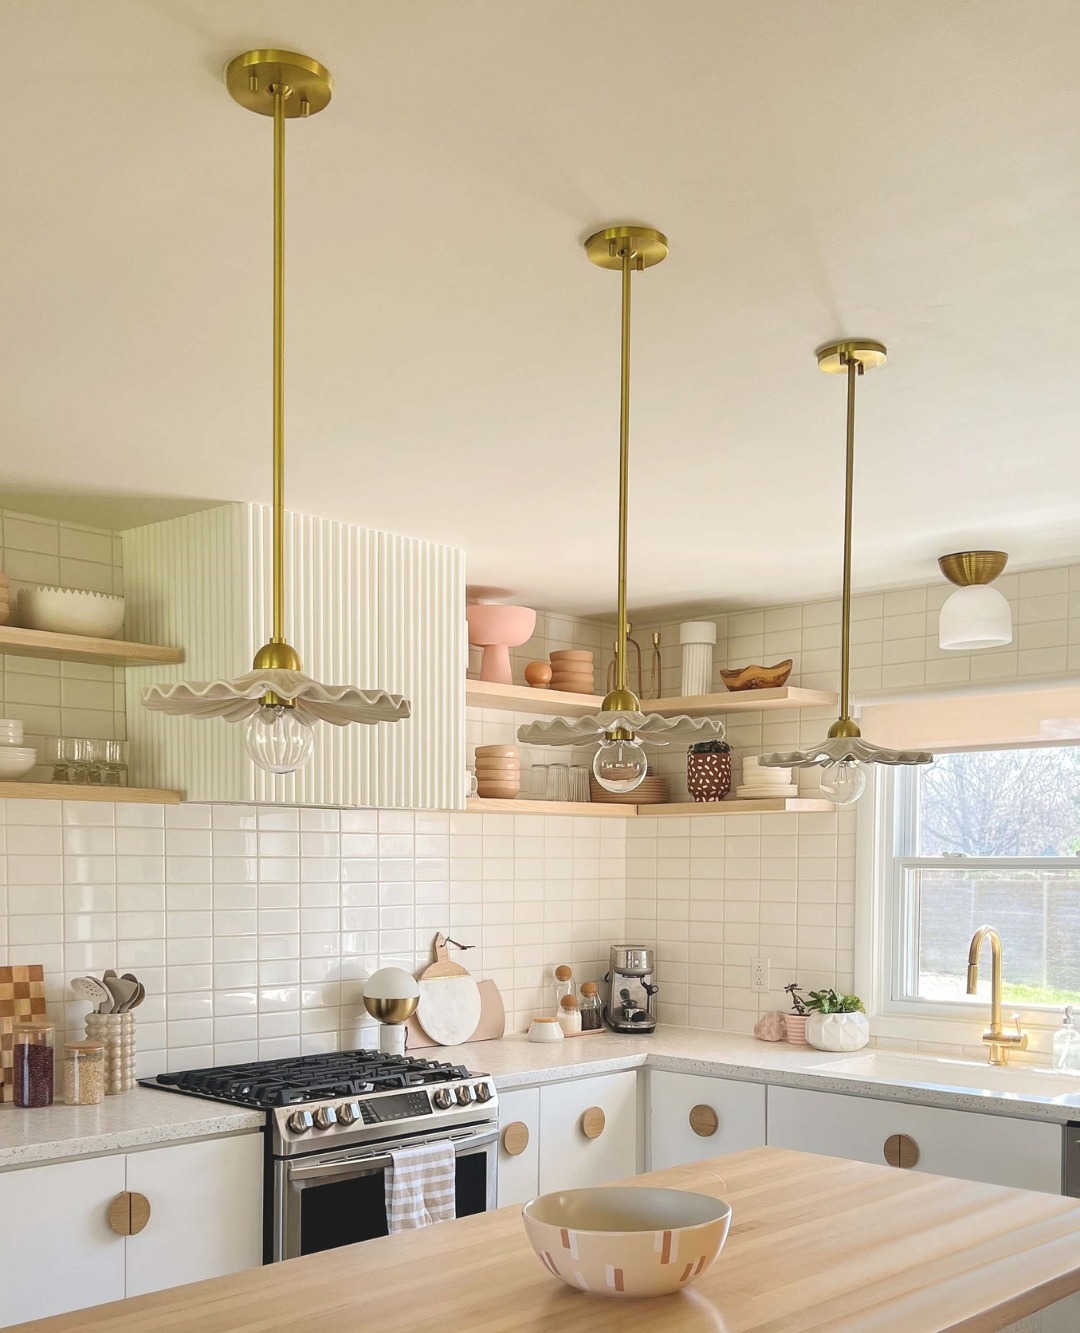 Retro Flair: Scalloped Pendants with a Golden Touch